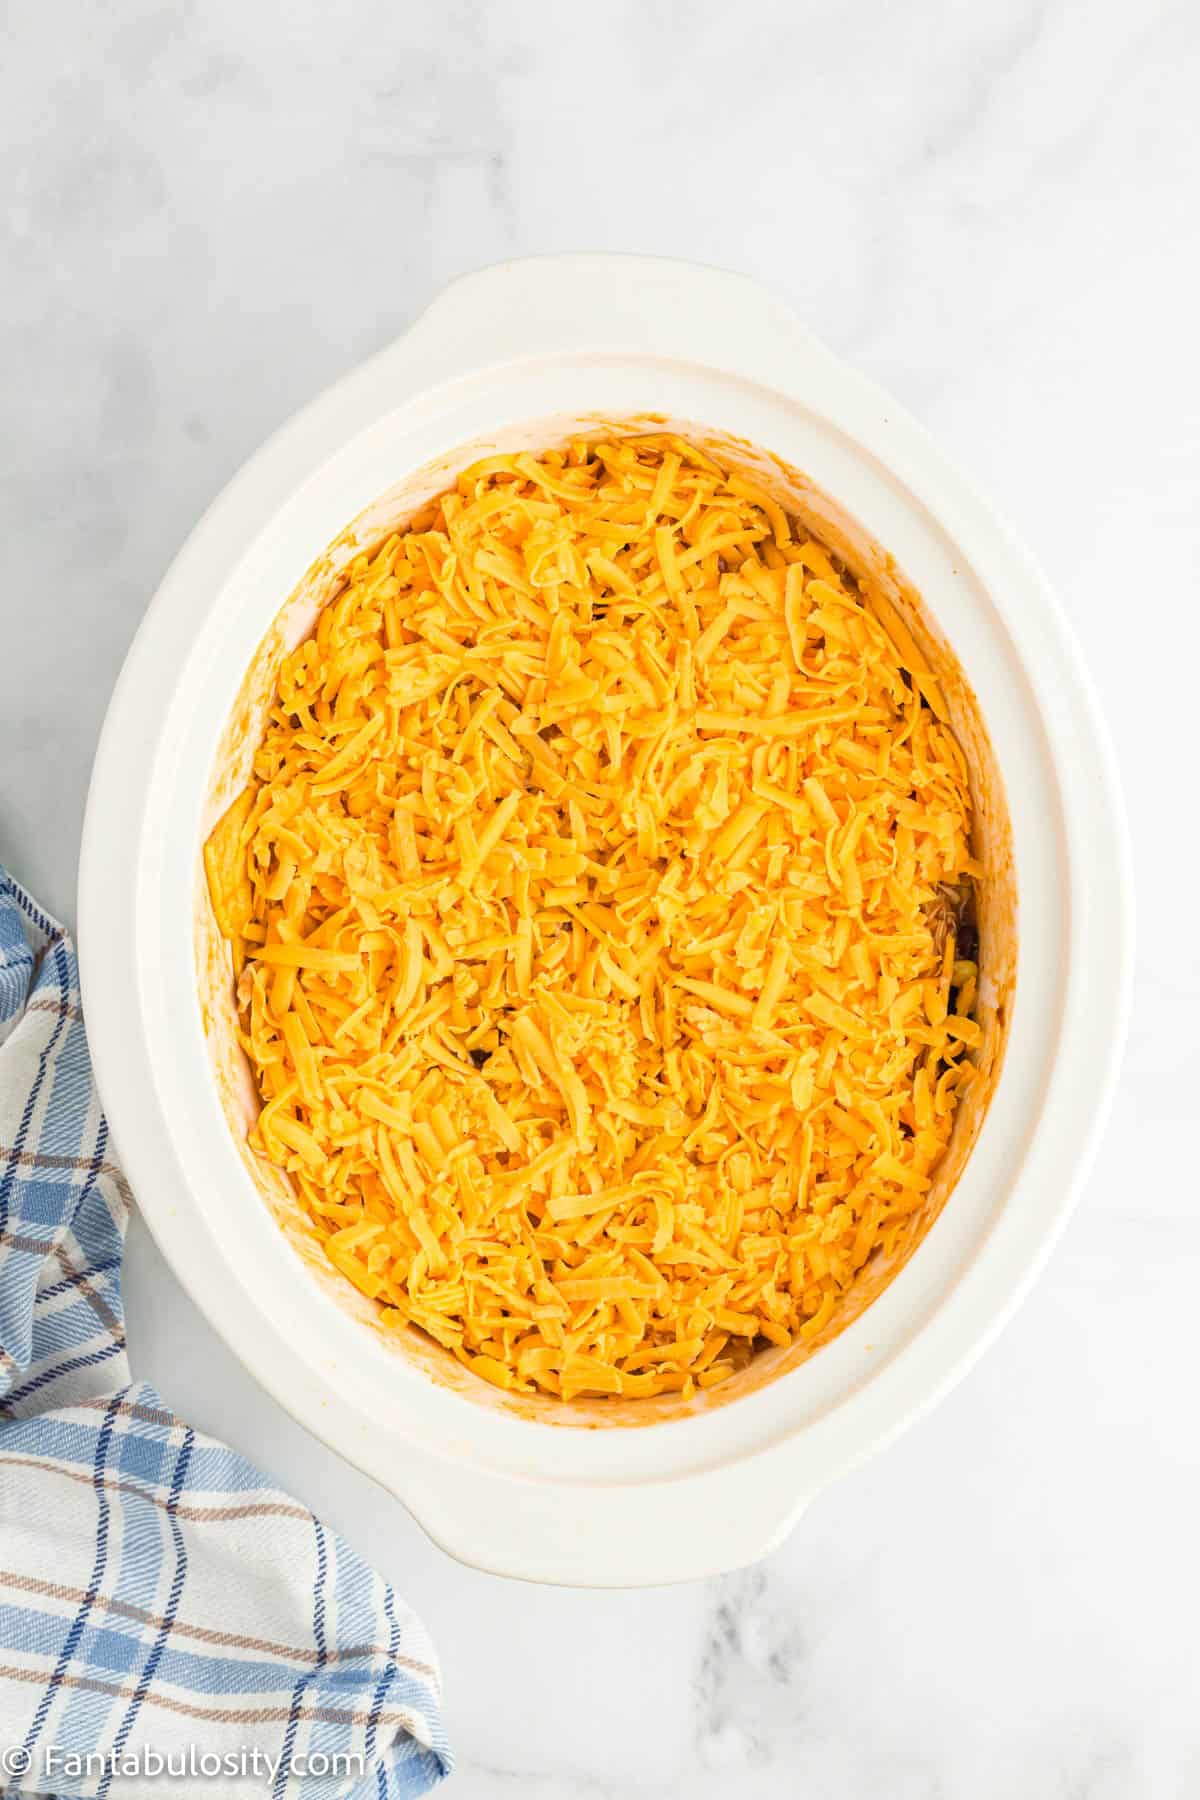 A slow cooker insert holds a mixture of chicken enchilada filling that has been covered with a layer of shredded cheddar cheese